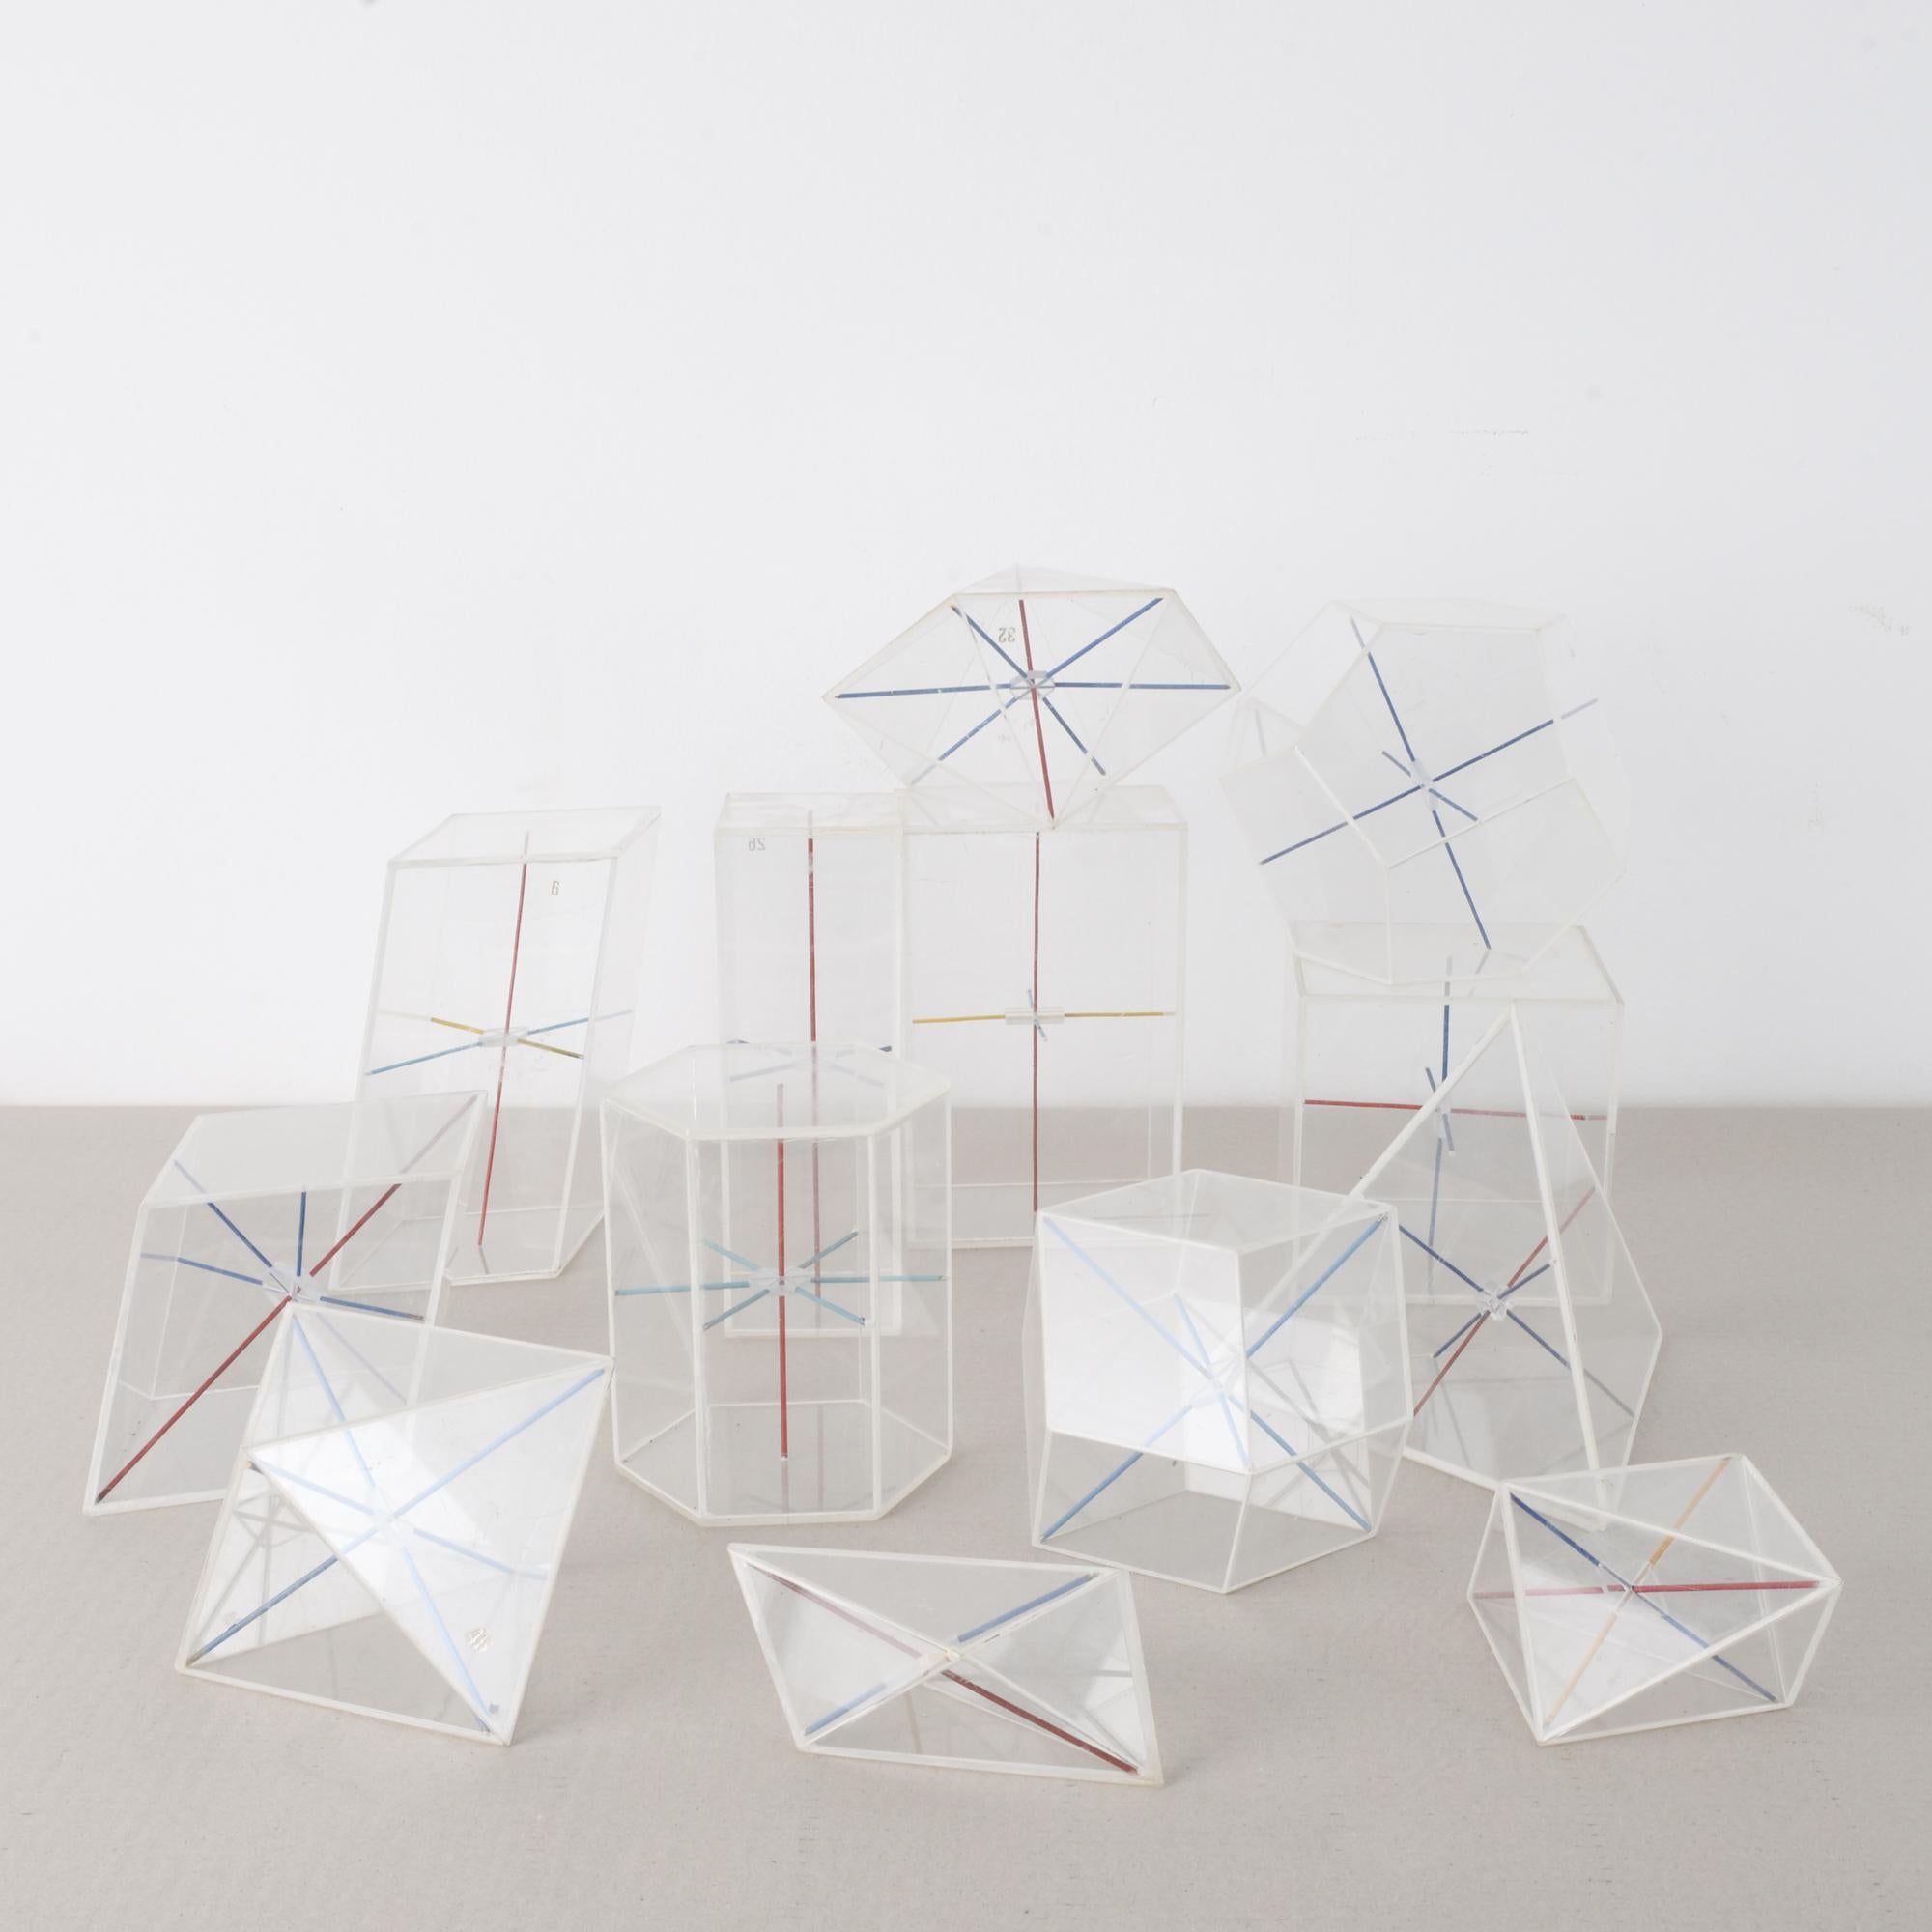 These geometric-shaped mathematical teaching aids were made in the former Czechoslovakia, circa 1960. The clear plastic cases house arrangements of red, blue, and yellow metal rods, which show how the forms can be divided. The assortment of